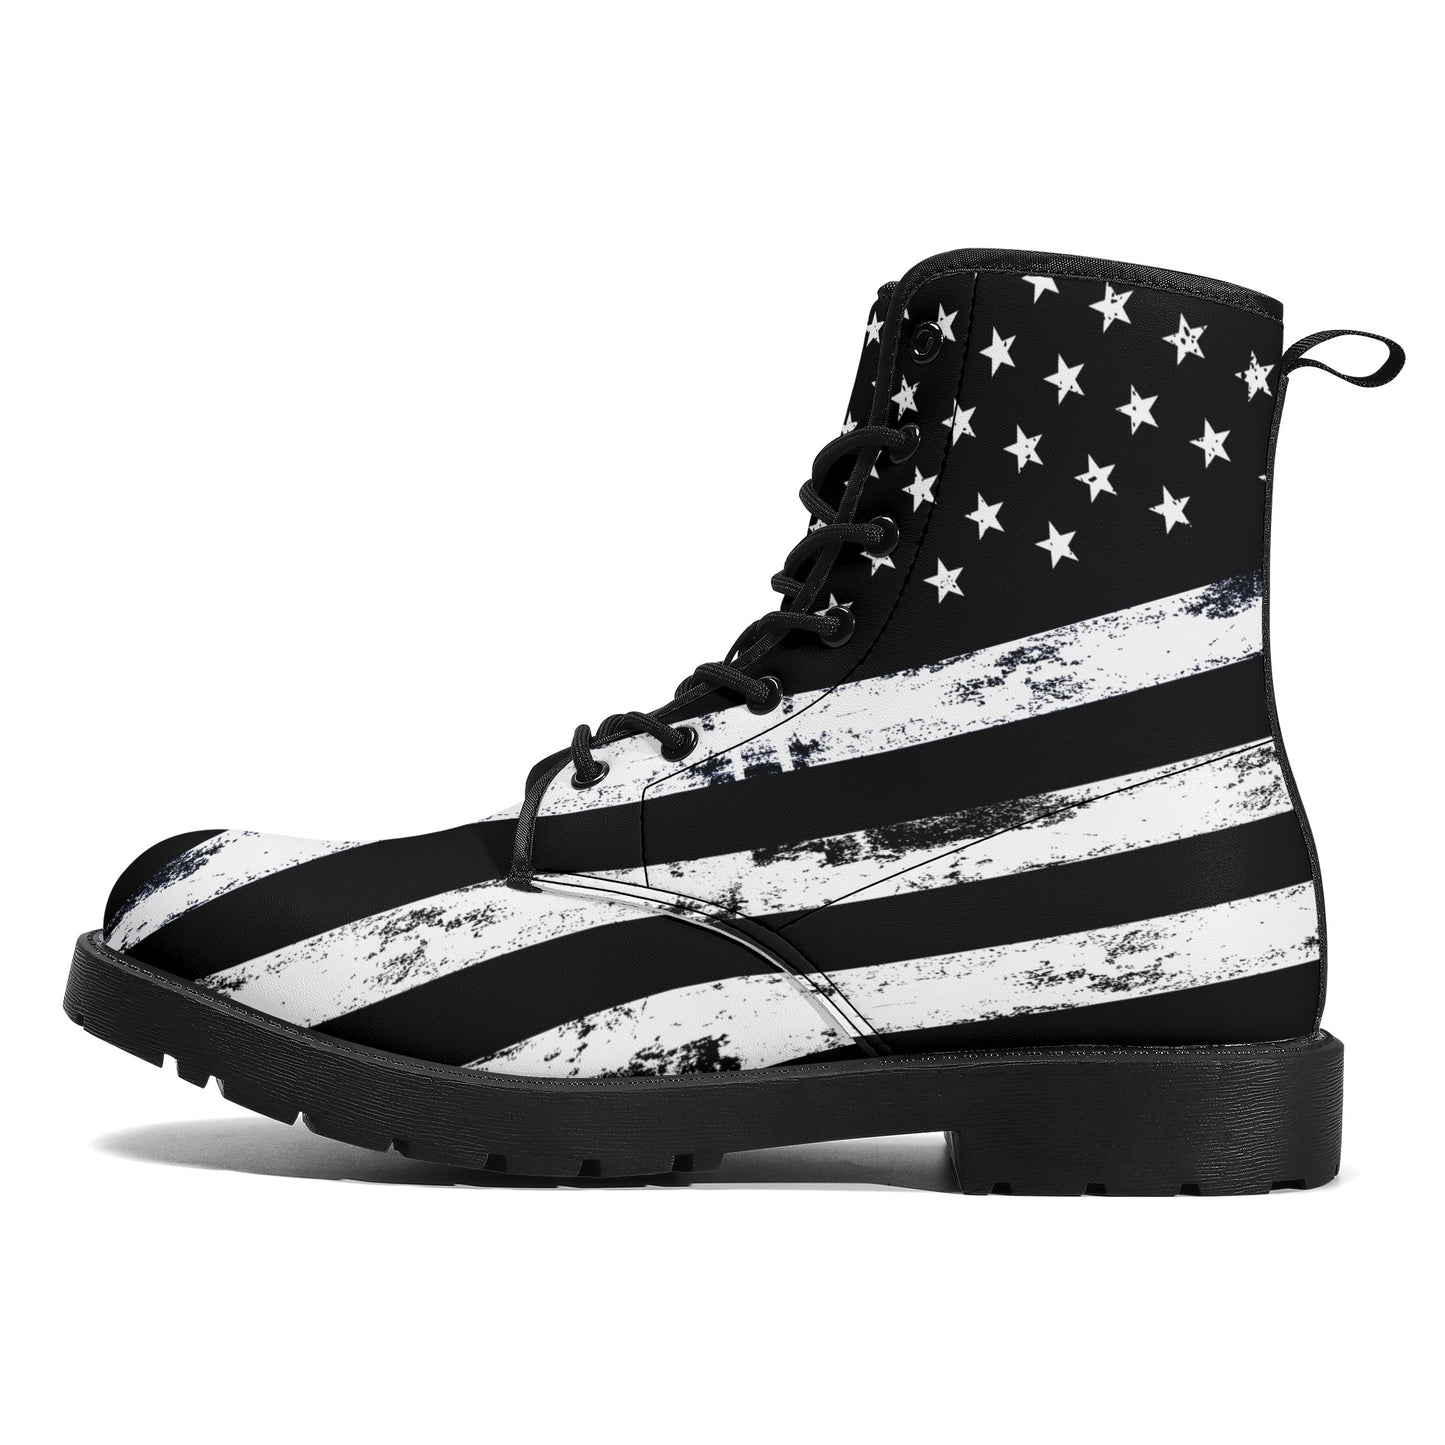 Black American Flag Men Leather Boots, Distressed Stars Stripes USA Patriotic Lace Up Shoes Festival Ankle Combat Work Hiking Gift Starcove Fashion